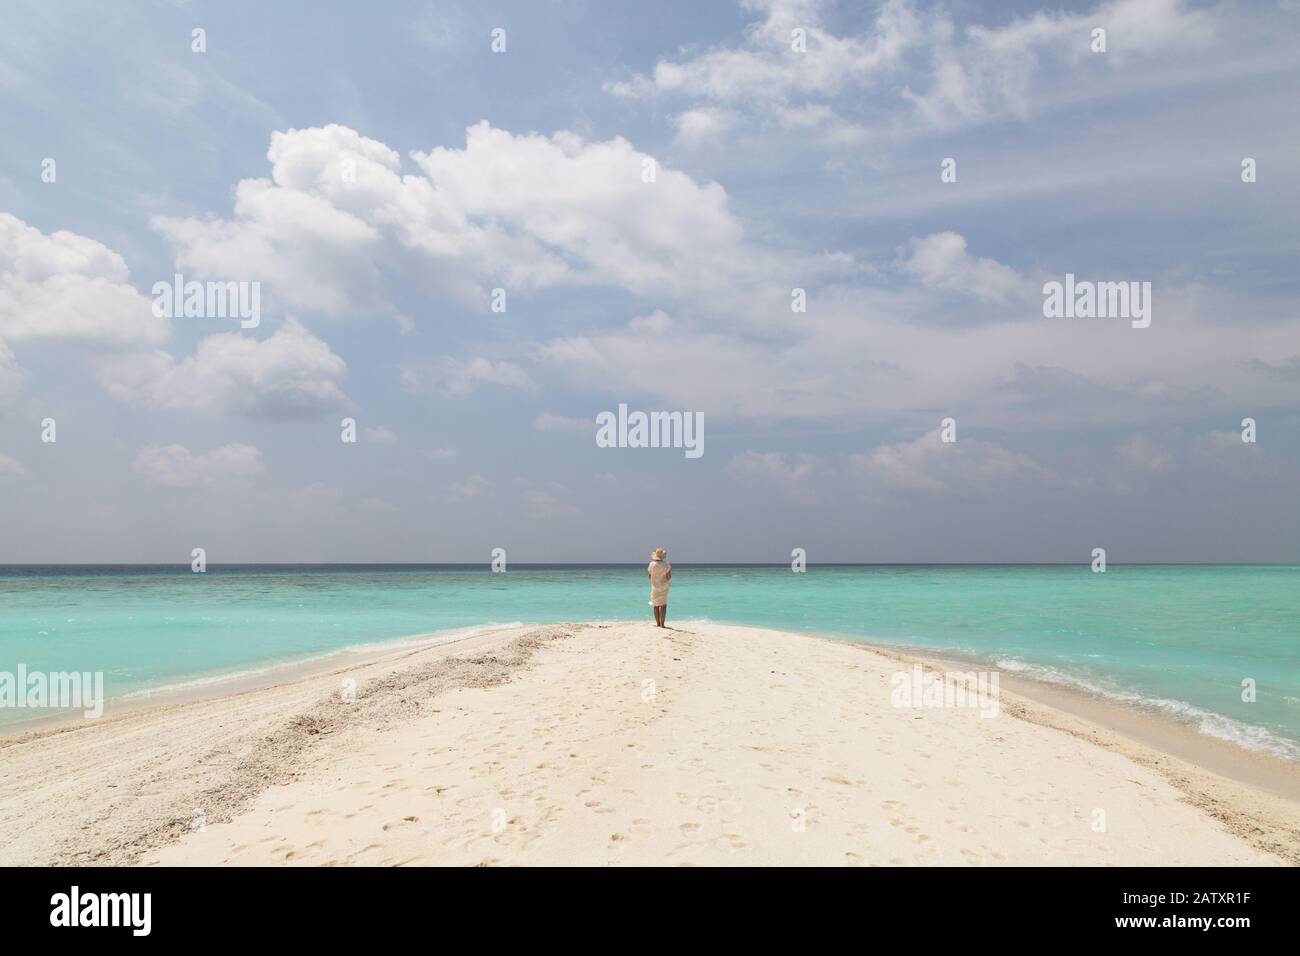 Concept Travel -Woman on beach; A lone woman standing on a tropical beach with white sand, blue sky and turquoise water, rear view,  the Maldives,Asia Stock Photo